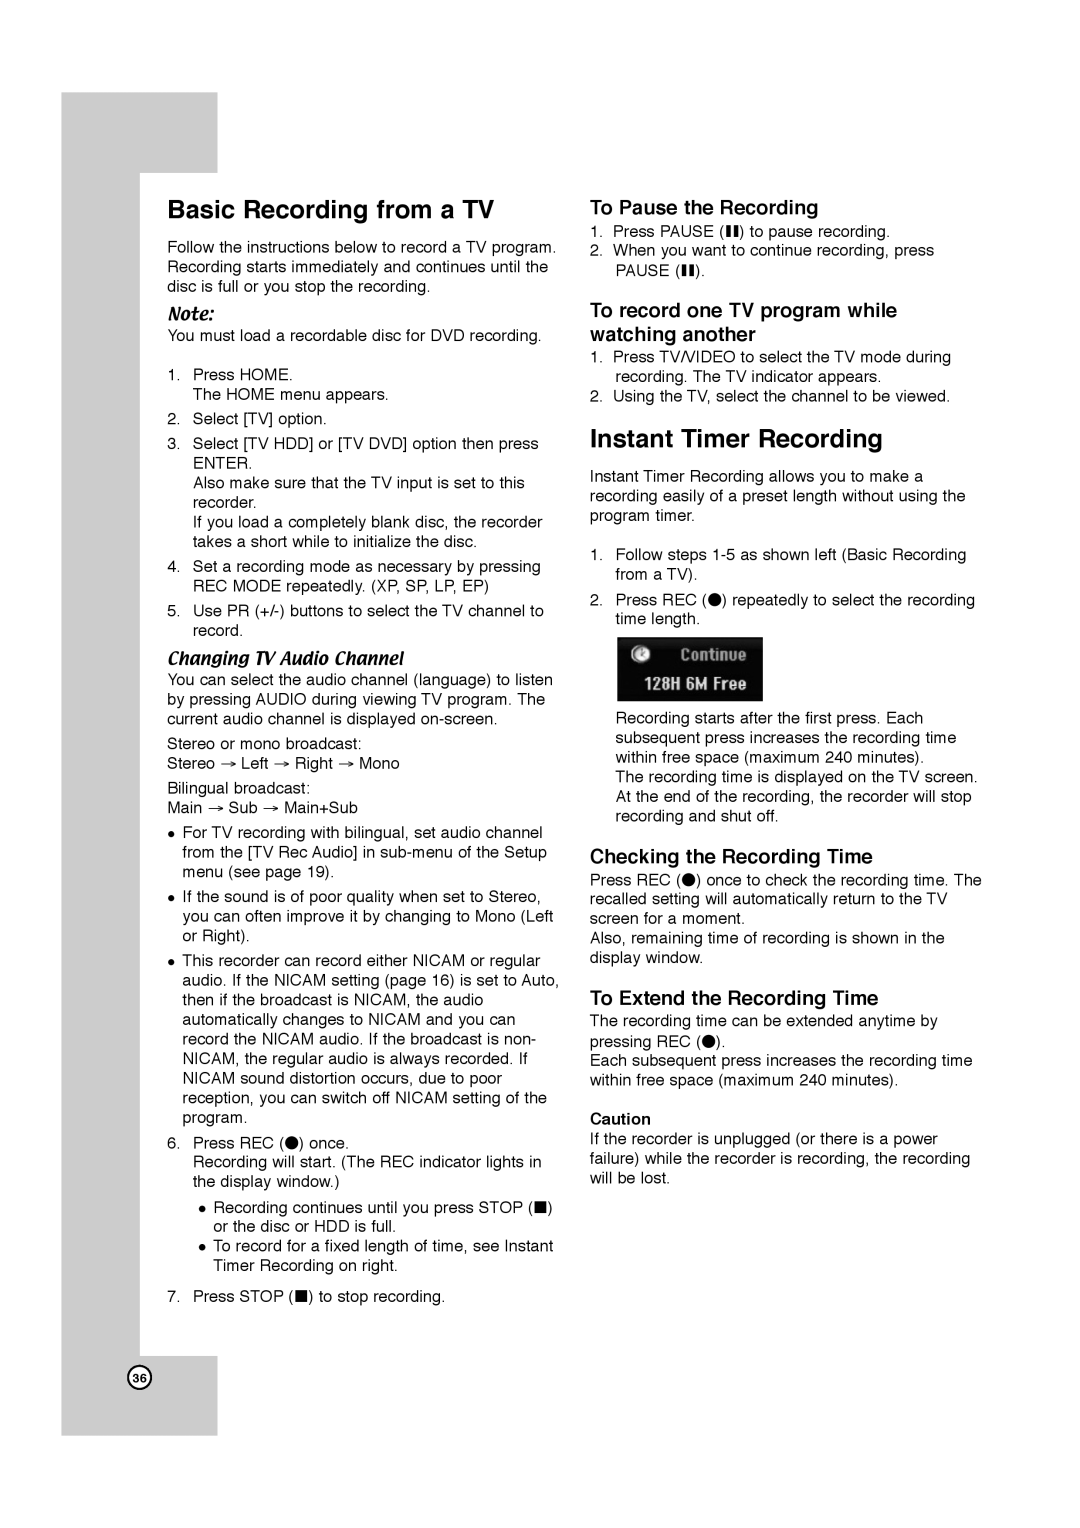 JVC LPT1132-001A manual Basic Recording from a TV, Instant Timer Recording 